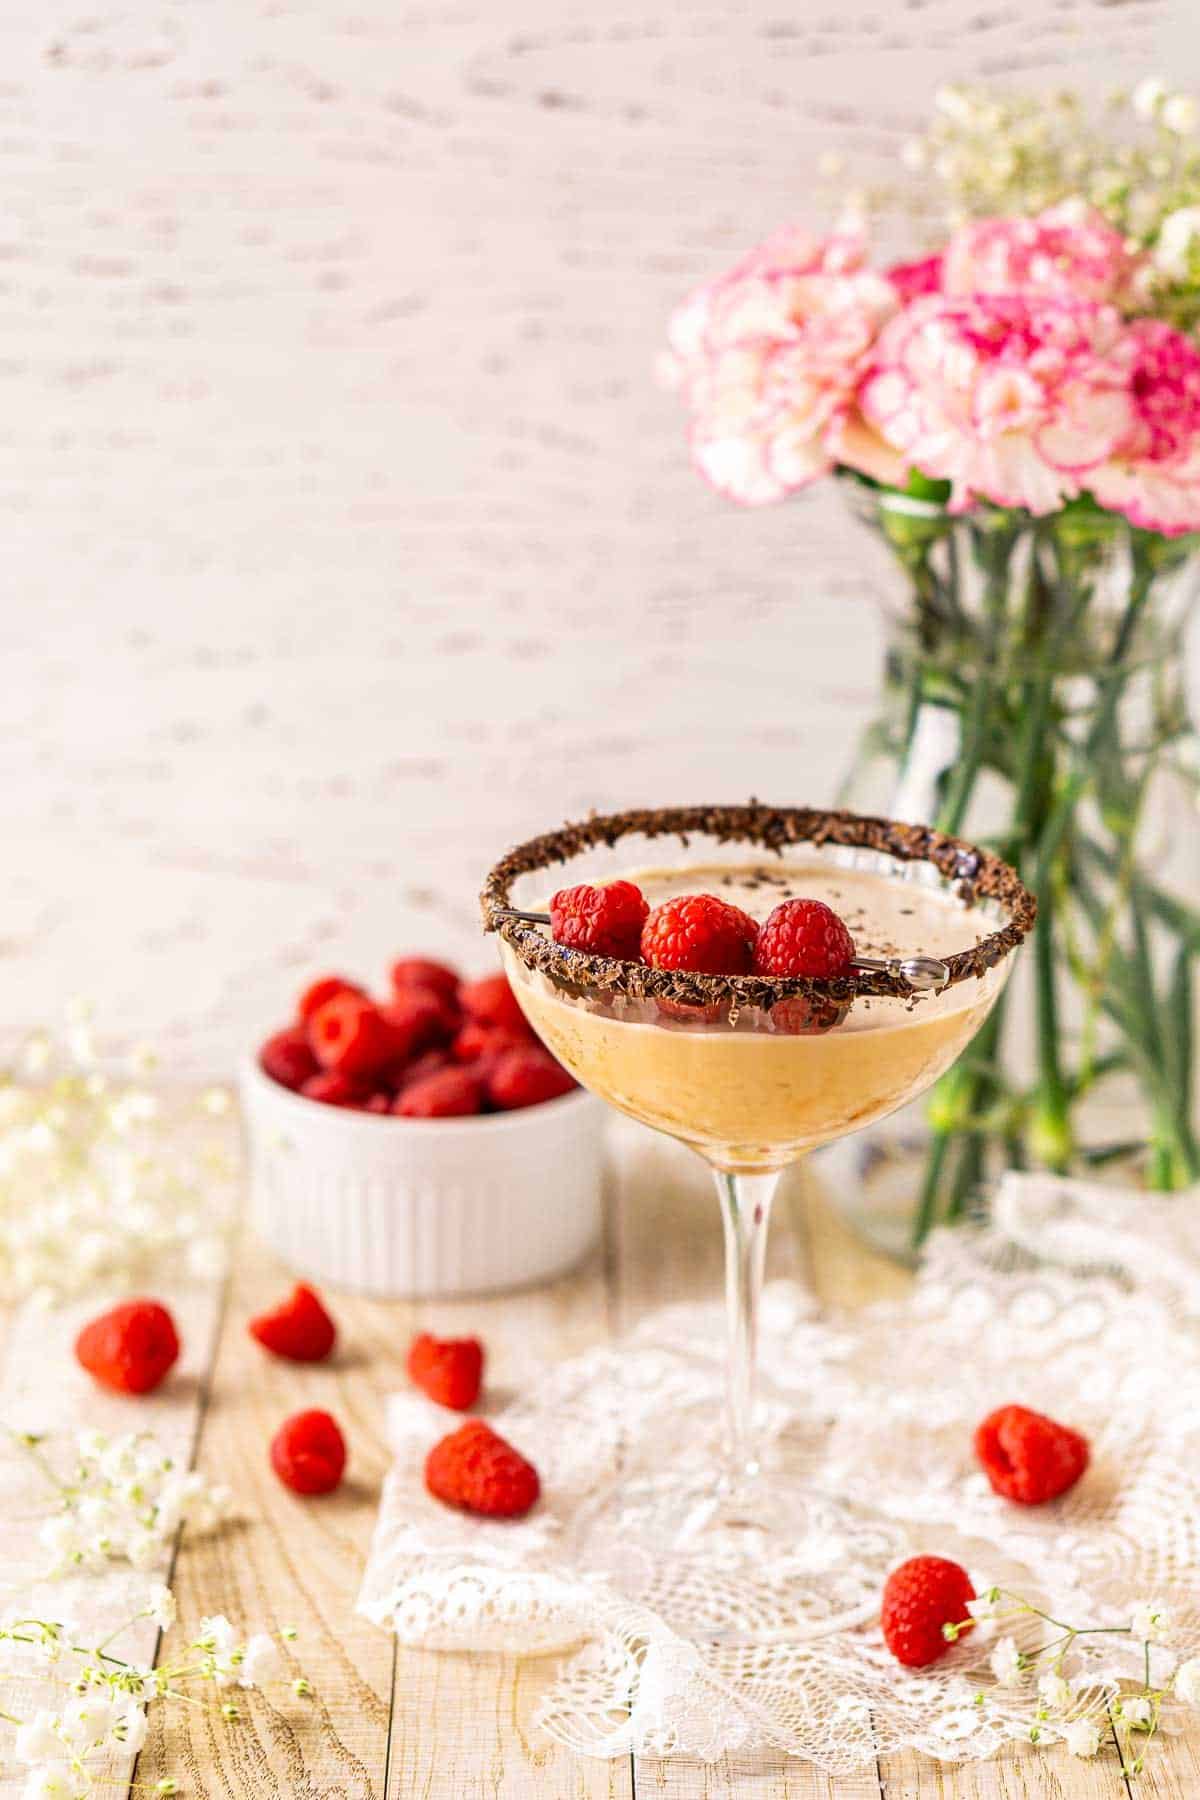 A chocolate-raspberry martini on a piece of white lace with raspberries scattered around it and flowers in the background.